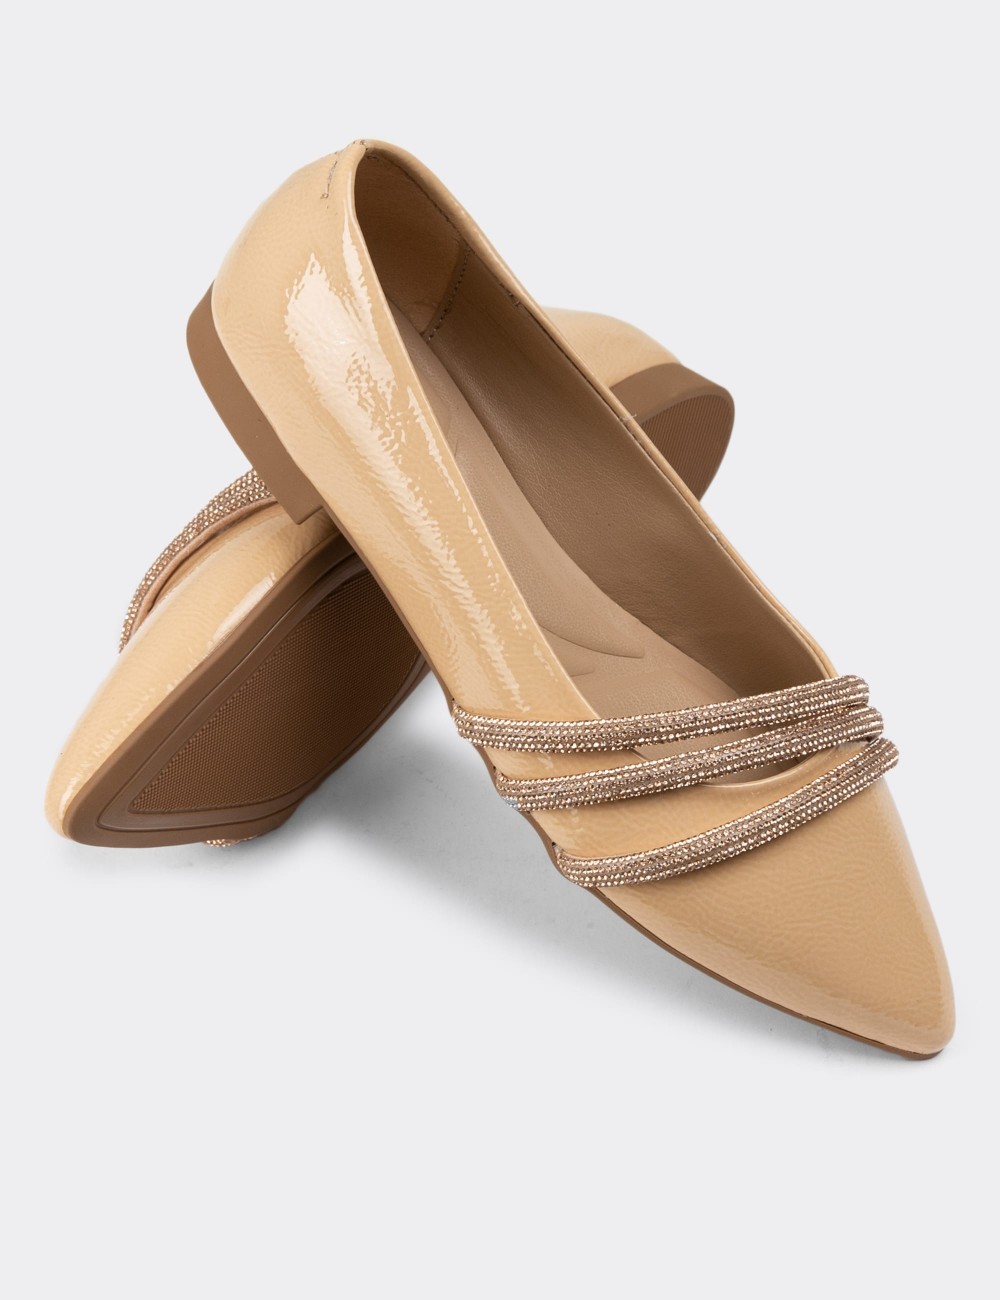 Camel Patent Loafers - 38601ZCMLC01